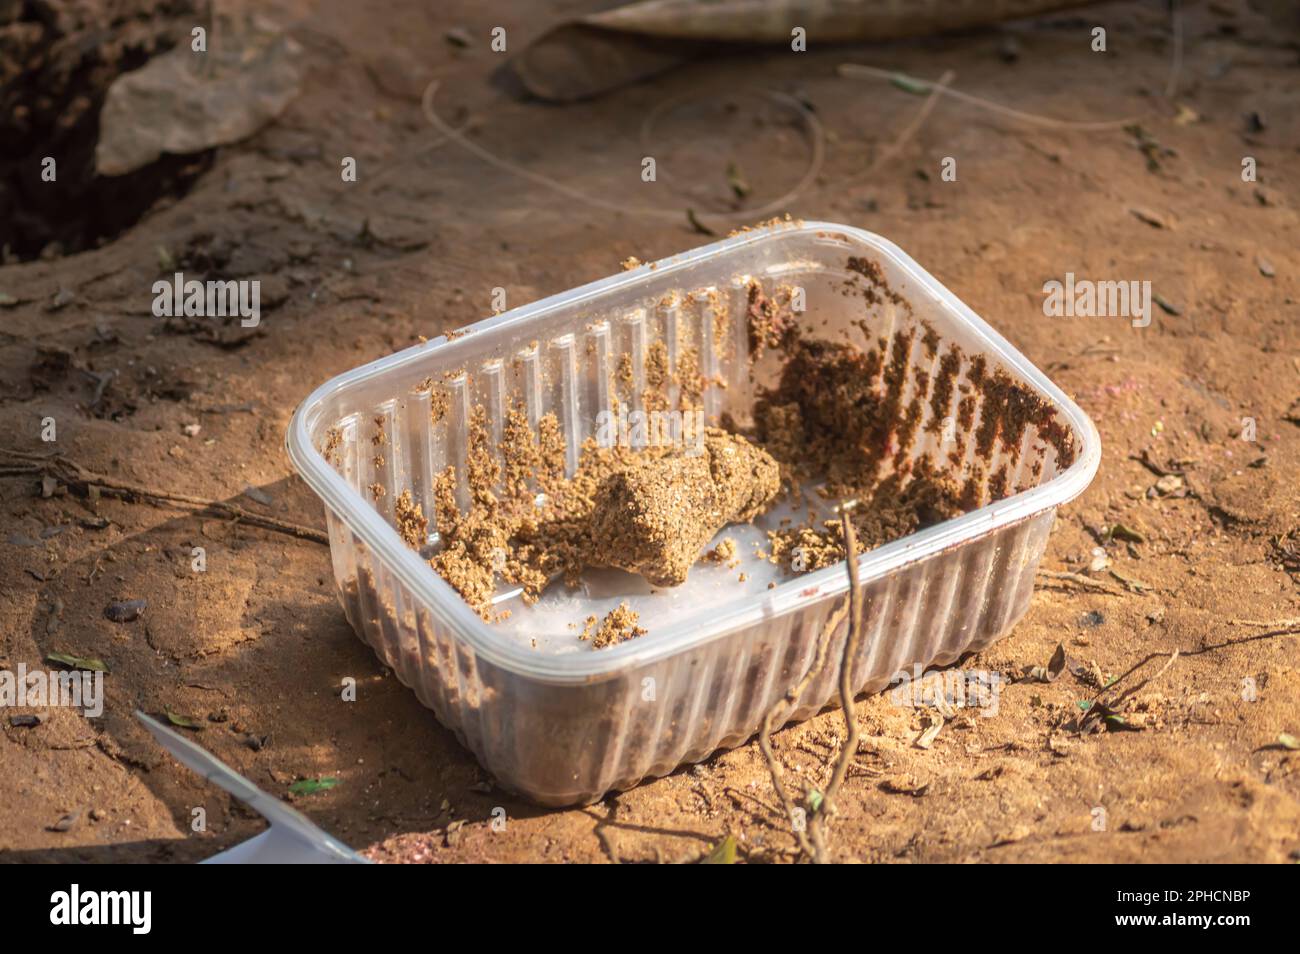 Bowl with leftover dough for fishing left on the ground by fishermen. Stock Photo